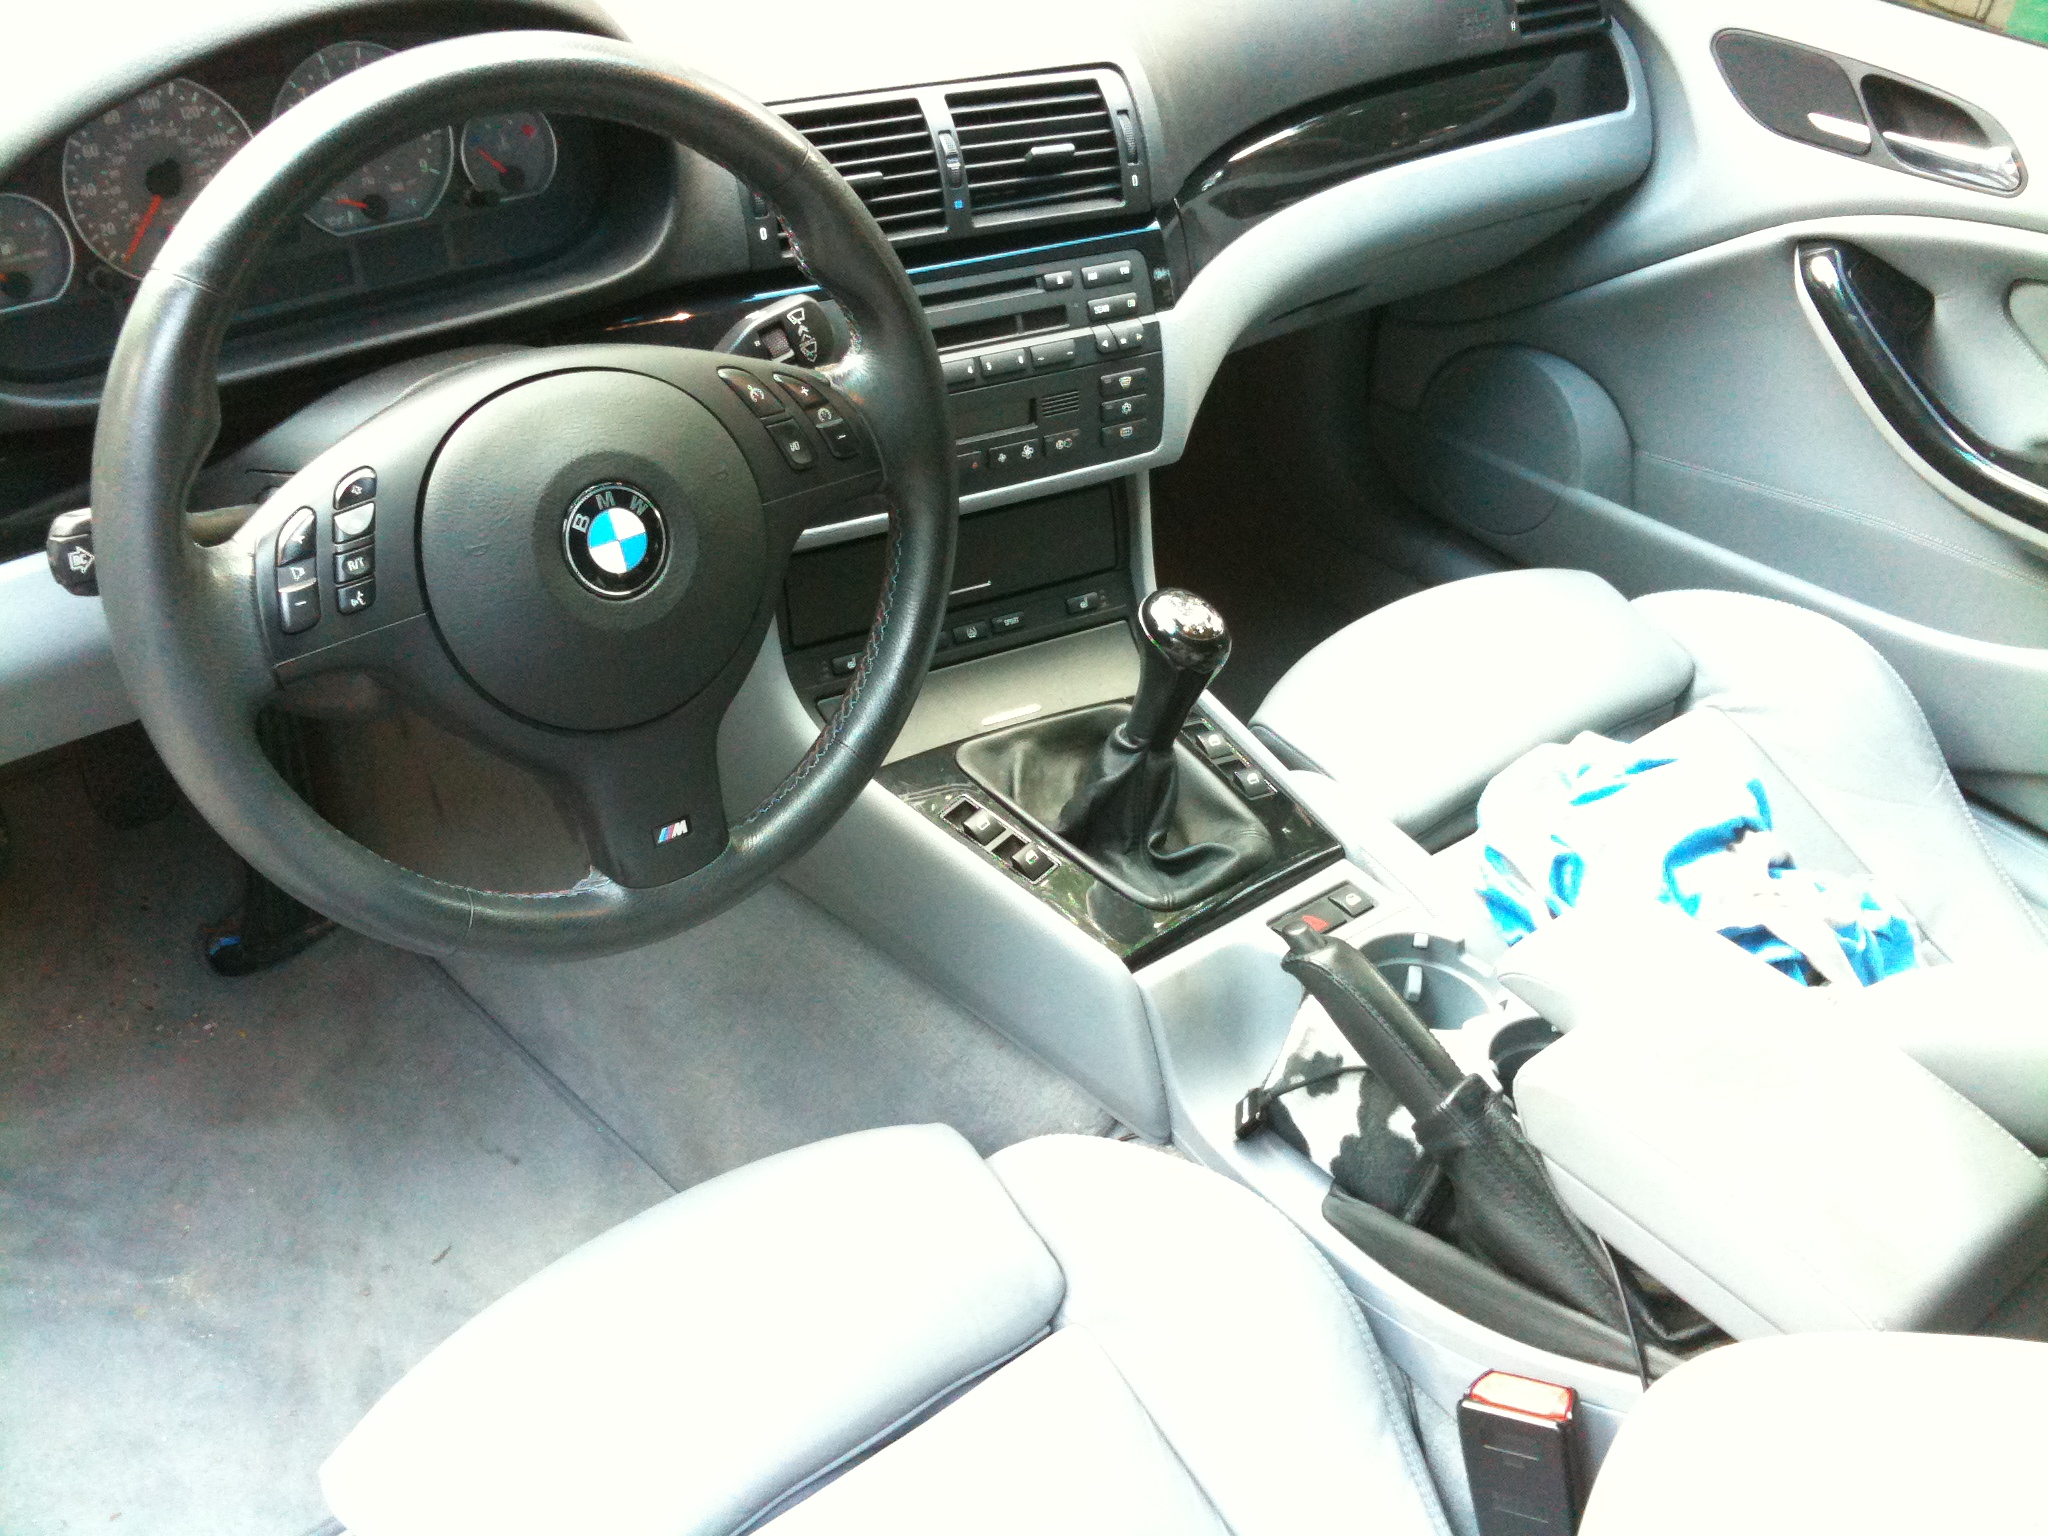 the inside view of a car with some gray seats